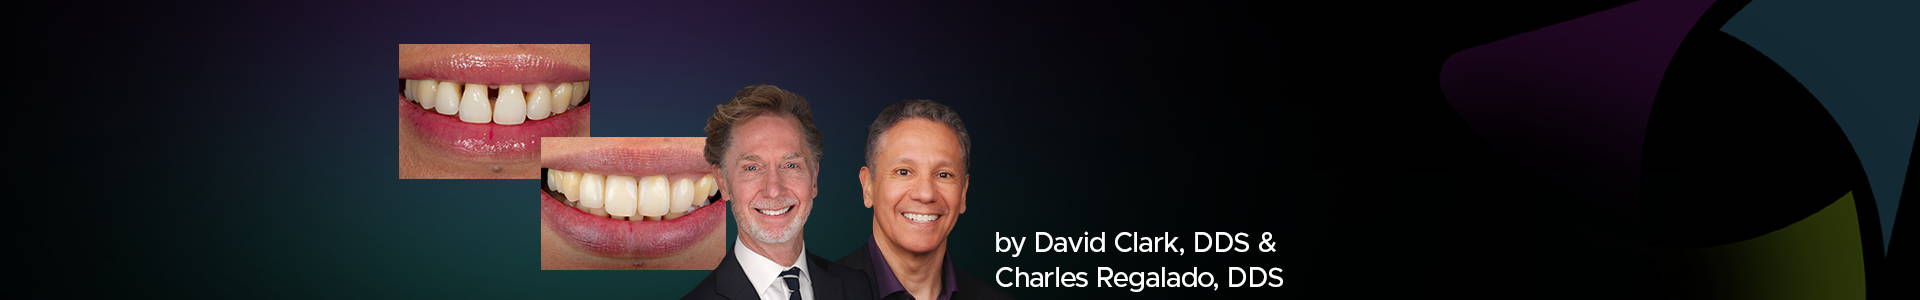 blog banner featuring Dr Clark and Dr Regalado and two clinical images